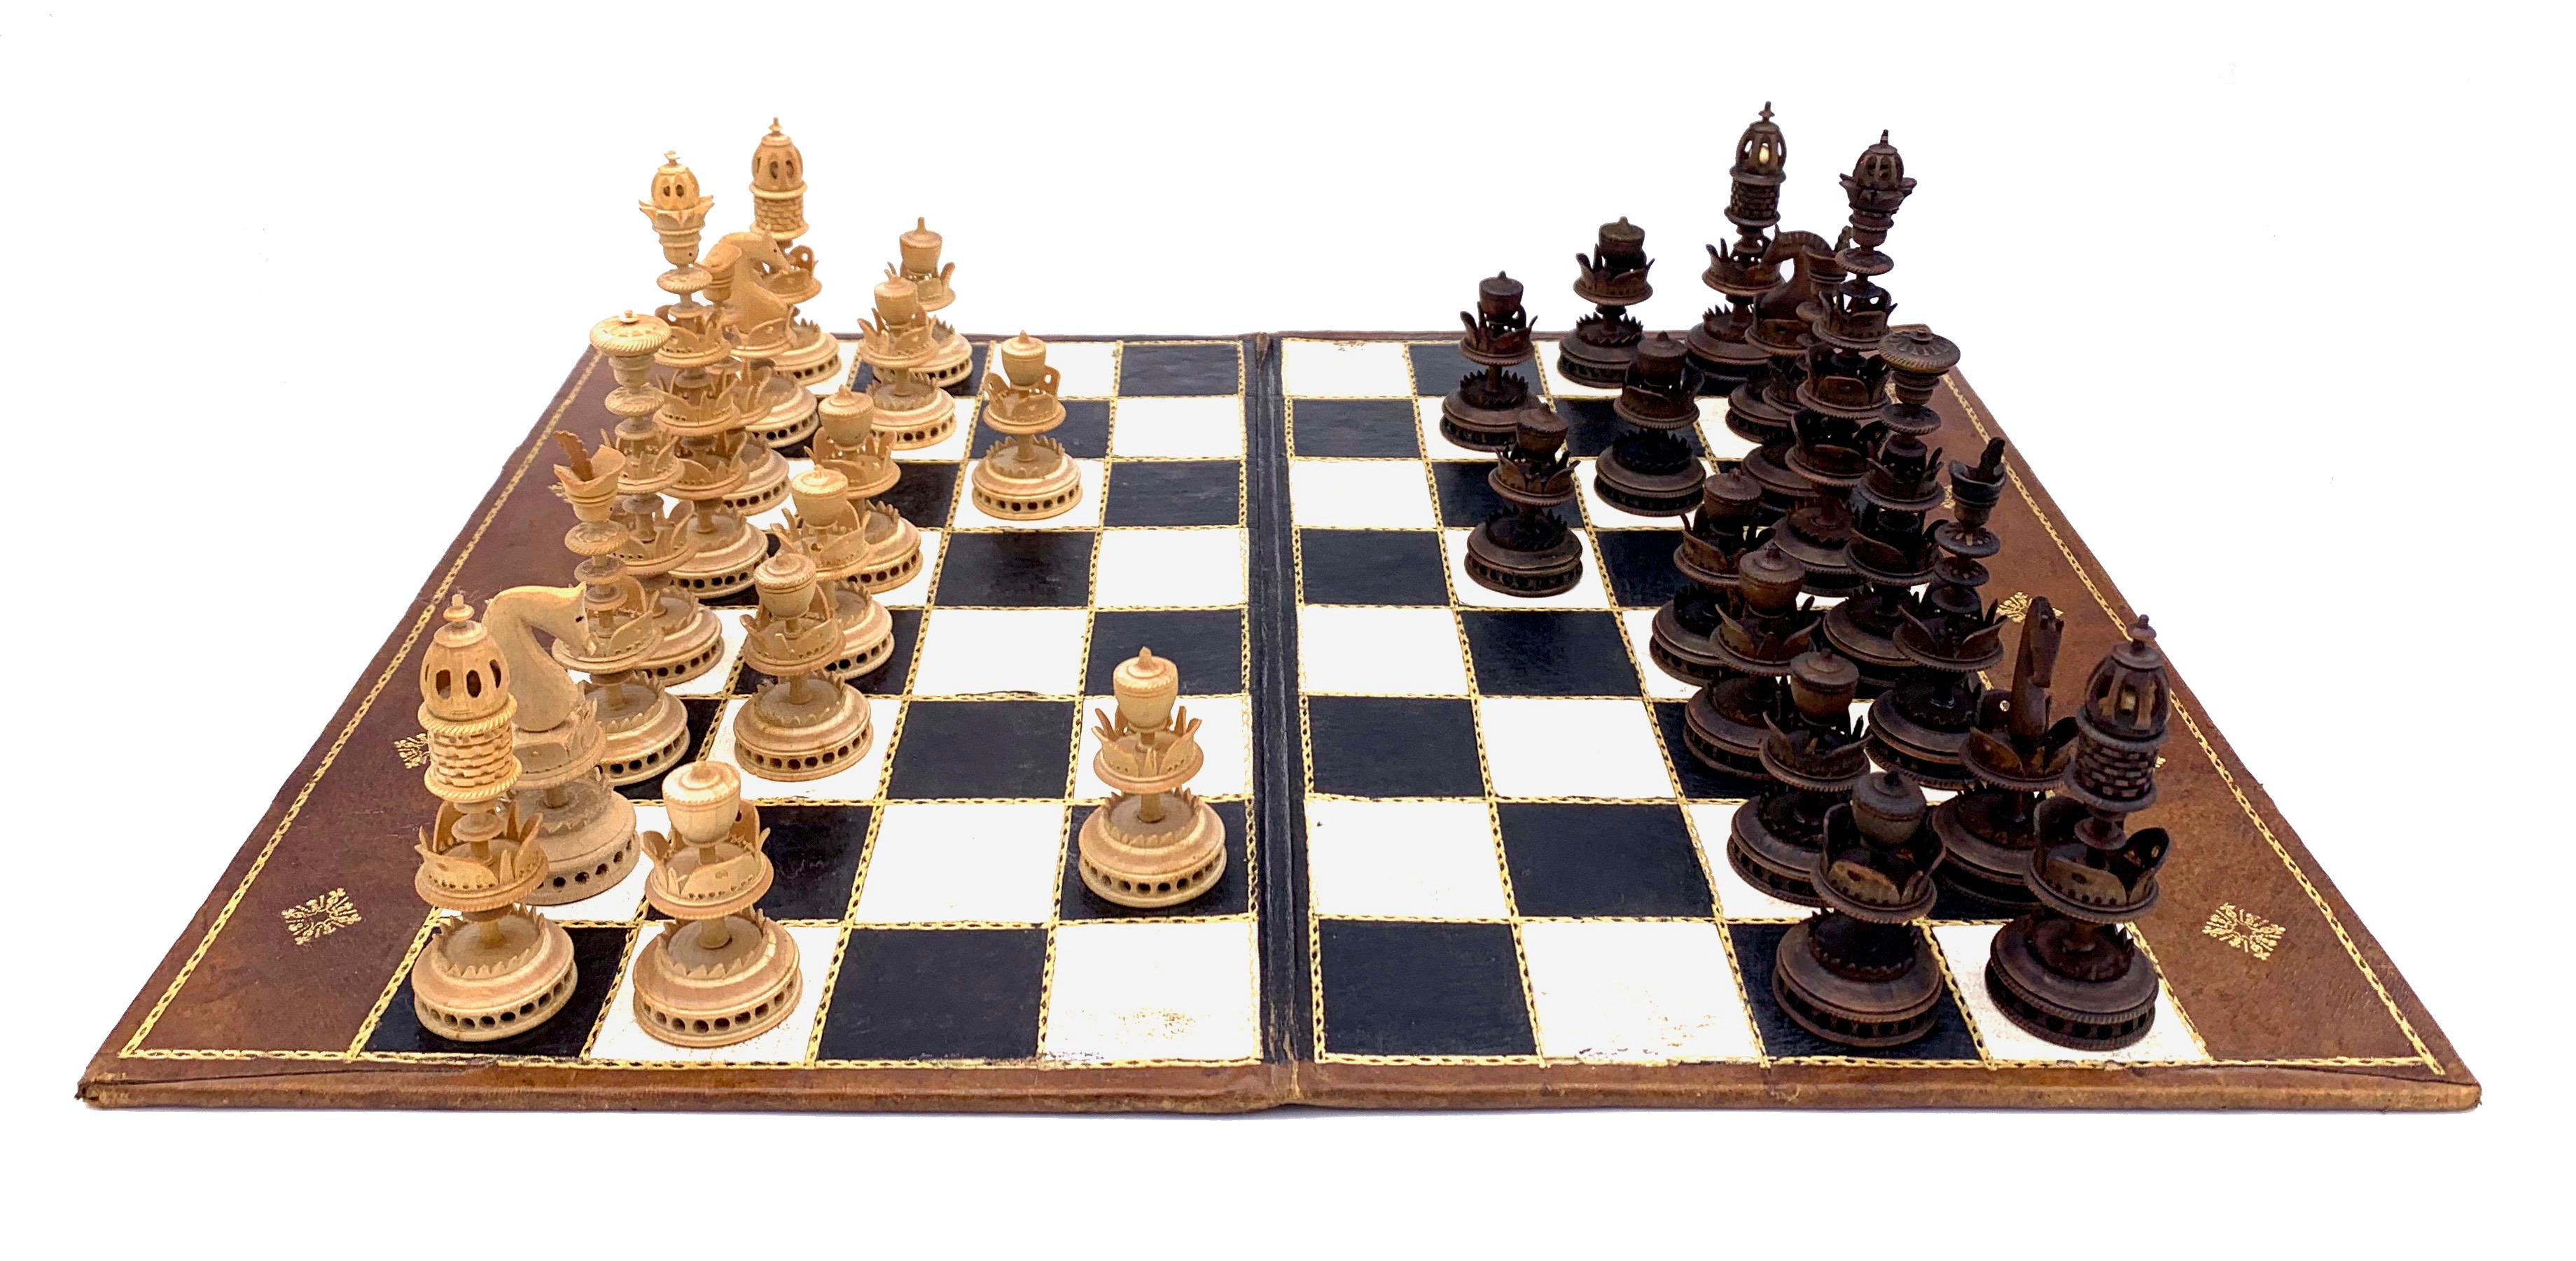 These charming chess game have been exquisitely handcrafted around 1850/60 in the Erzgebirge in Saxony. The Erzgebirge was famous for handcrafted toys masde out of wood in Germany.
They are turned and carved out of maple, and pear wood.


The